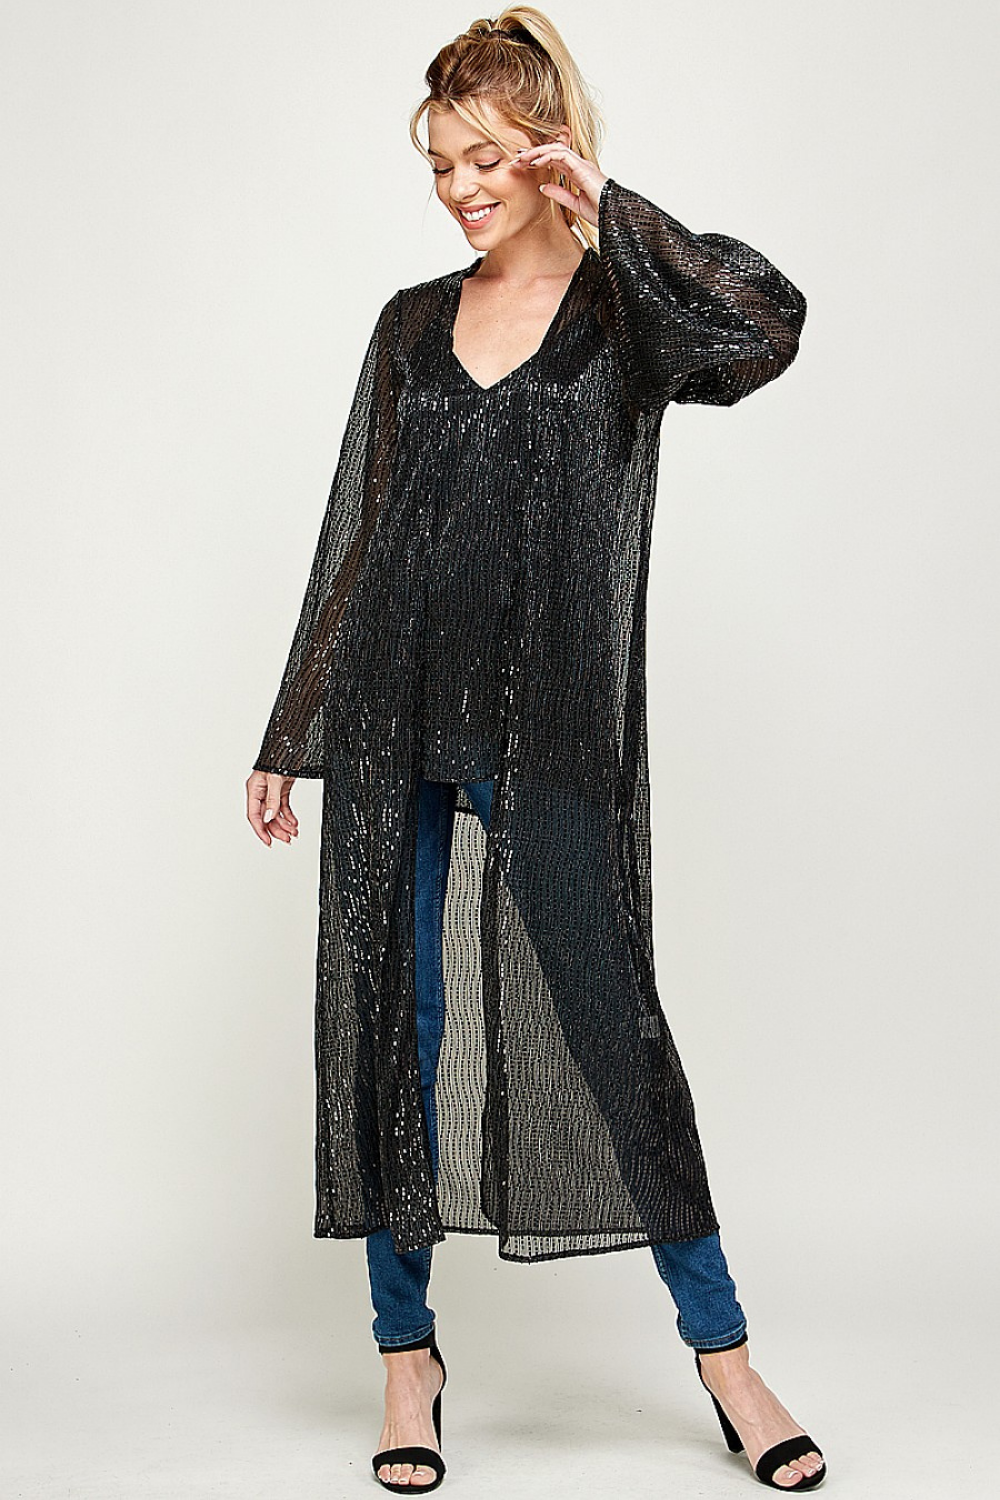 Black Sequins Duster/ Dress – ICONIC7